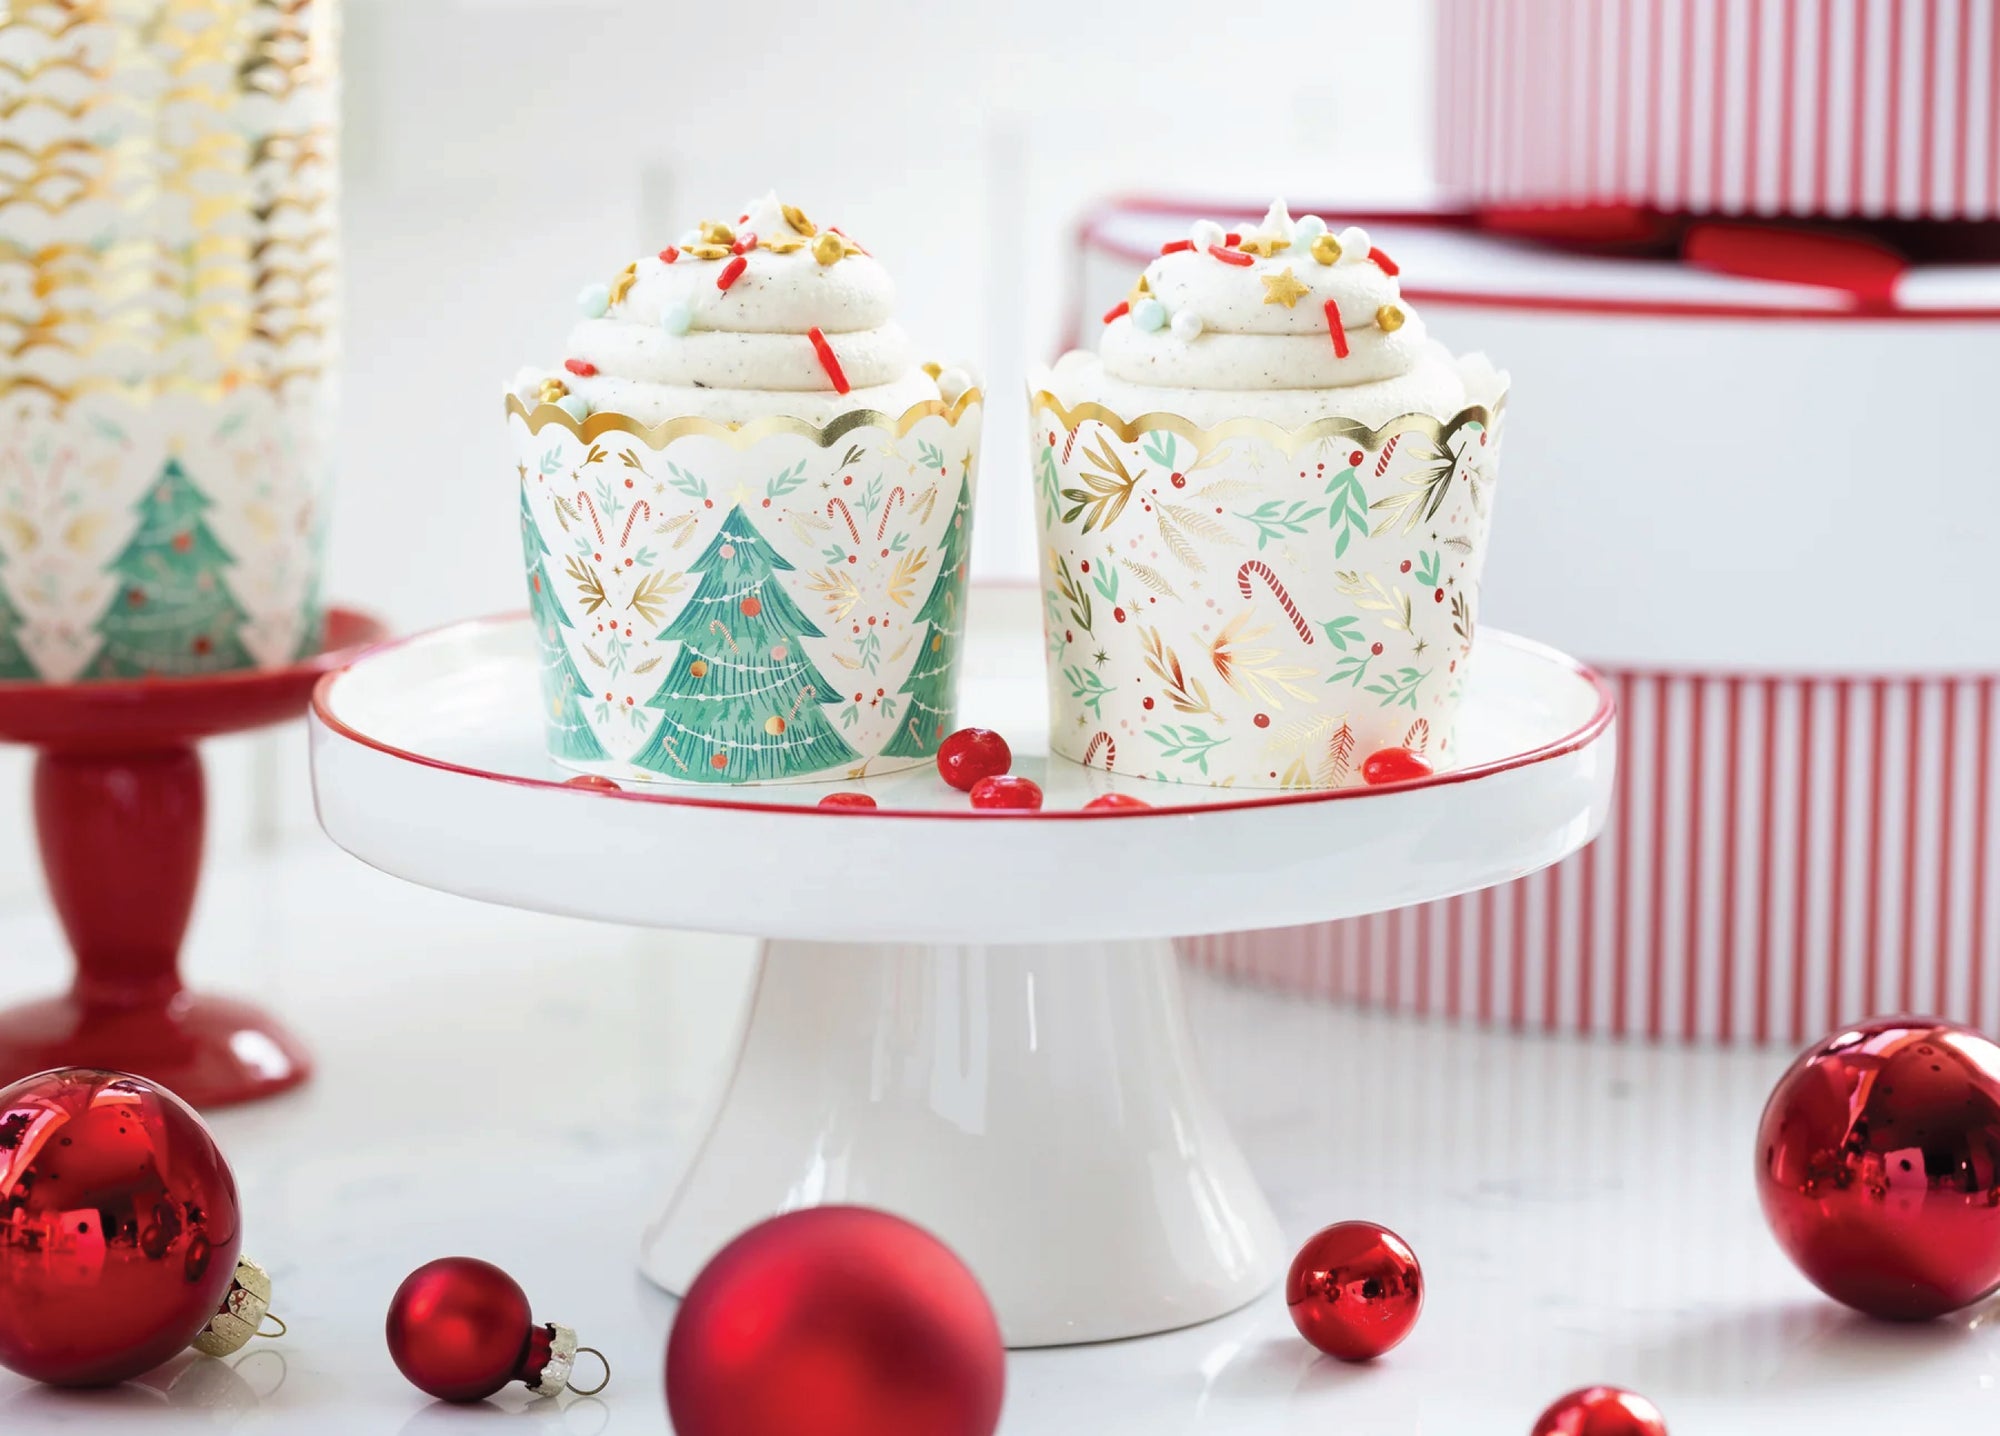 Candy Cane Jumbo Food Cups 40ct | The Party Darling